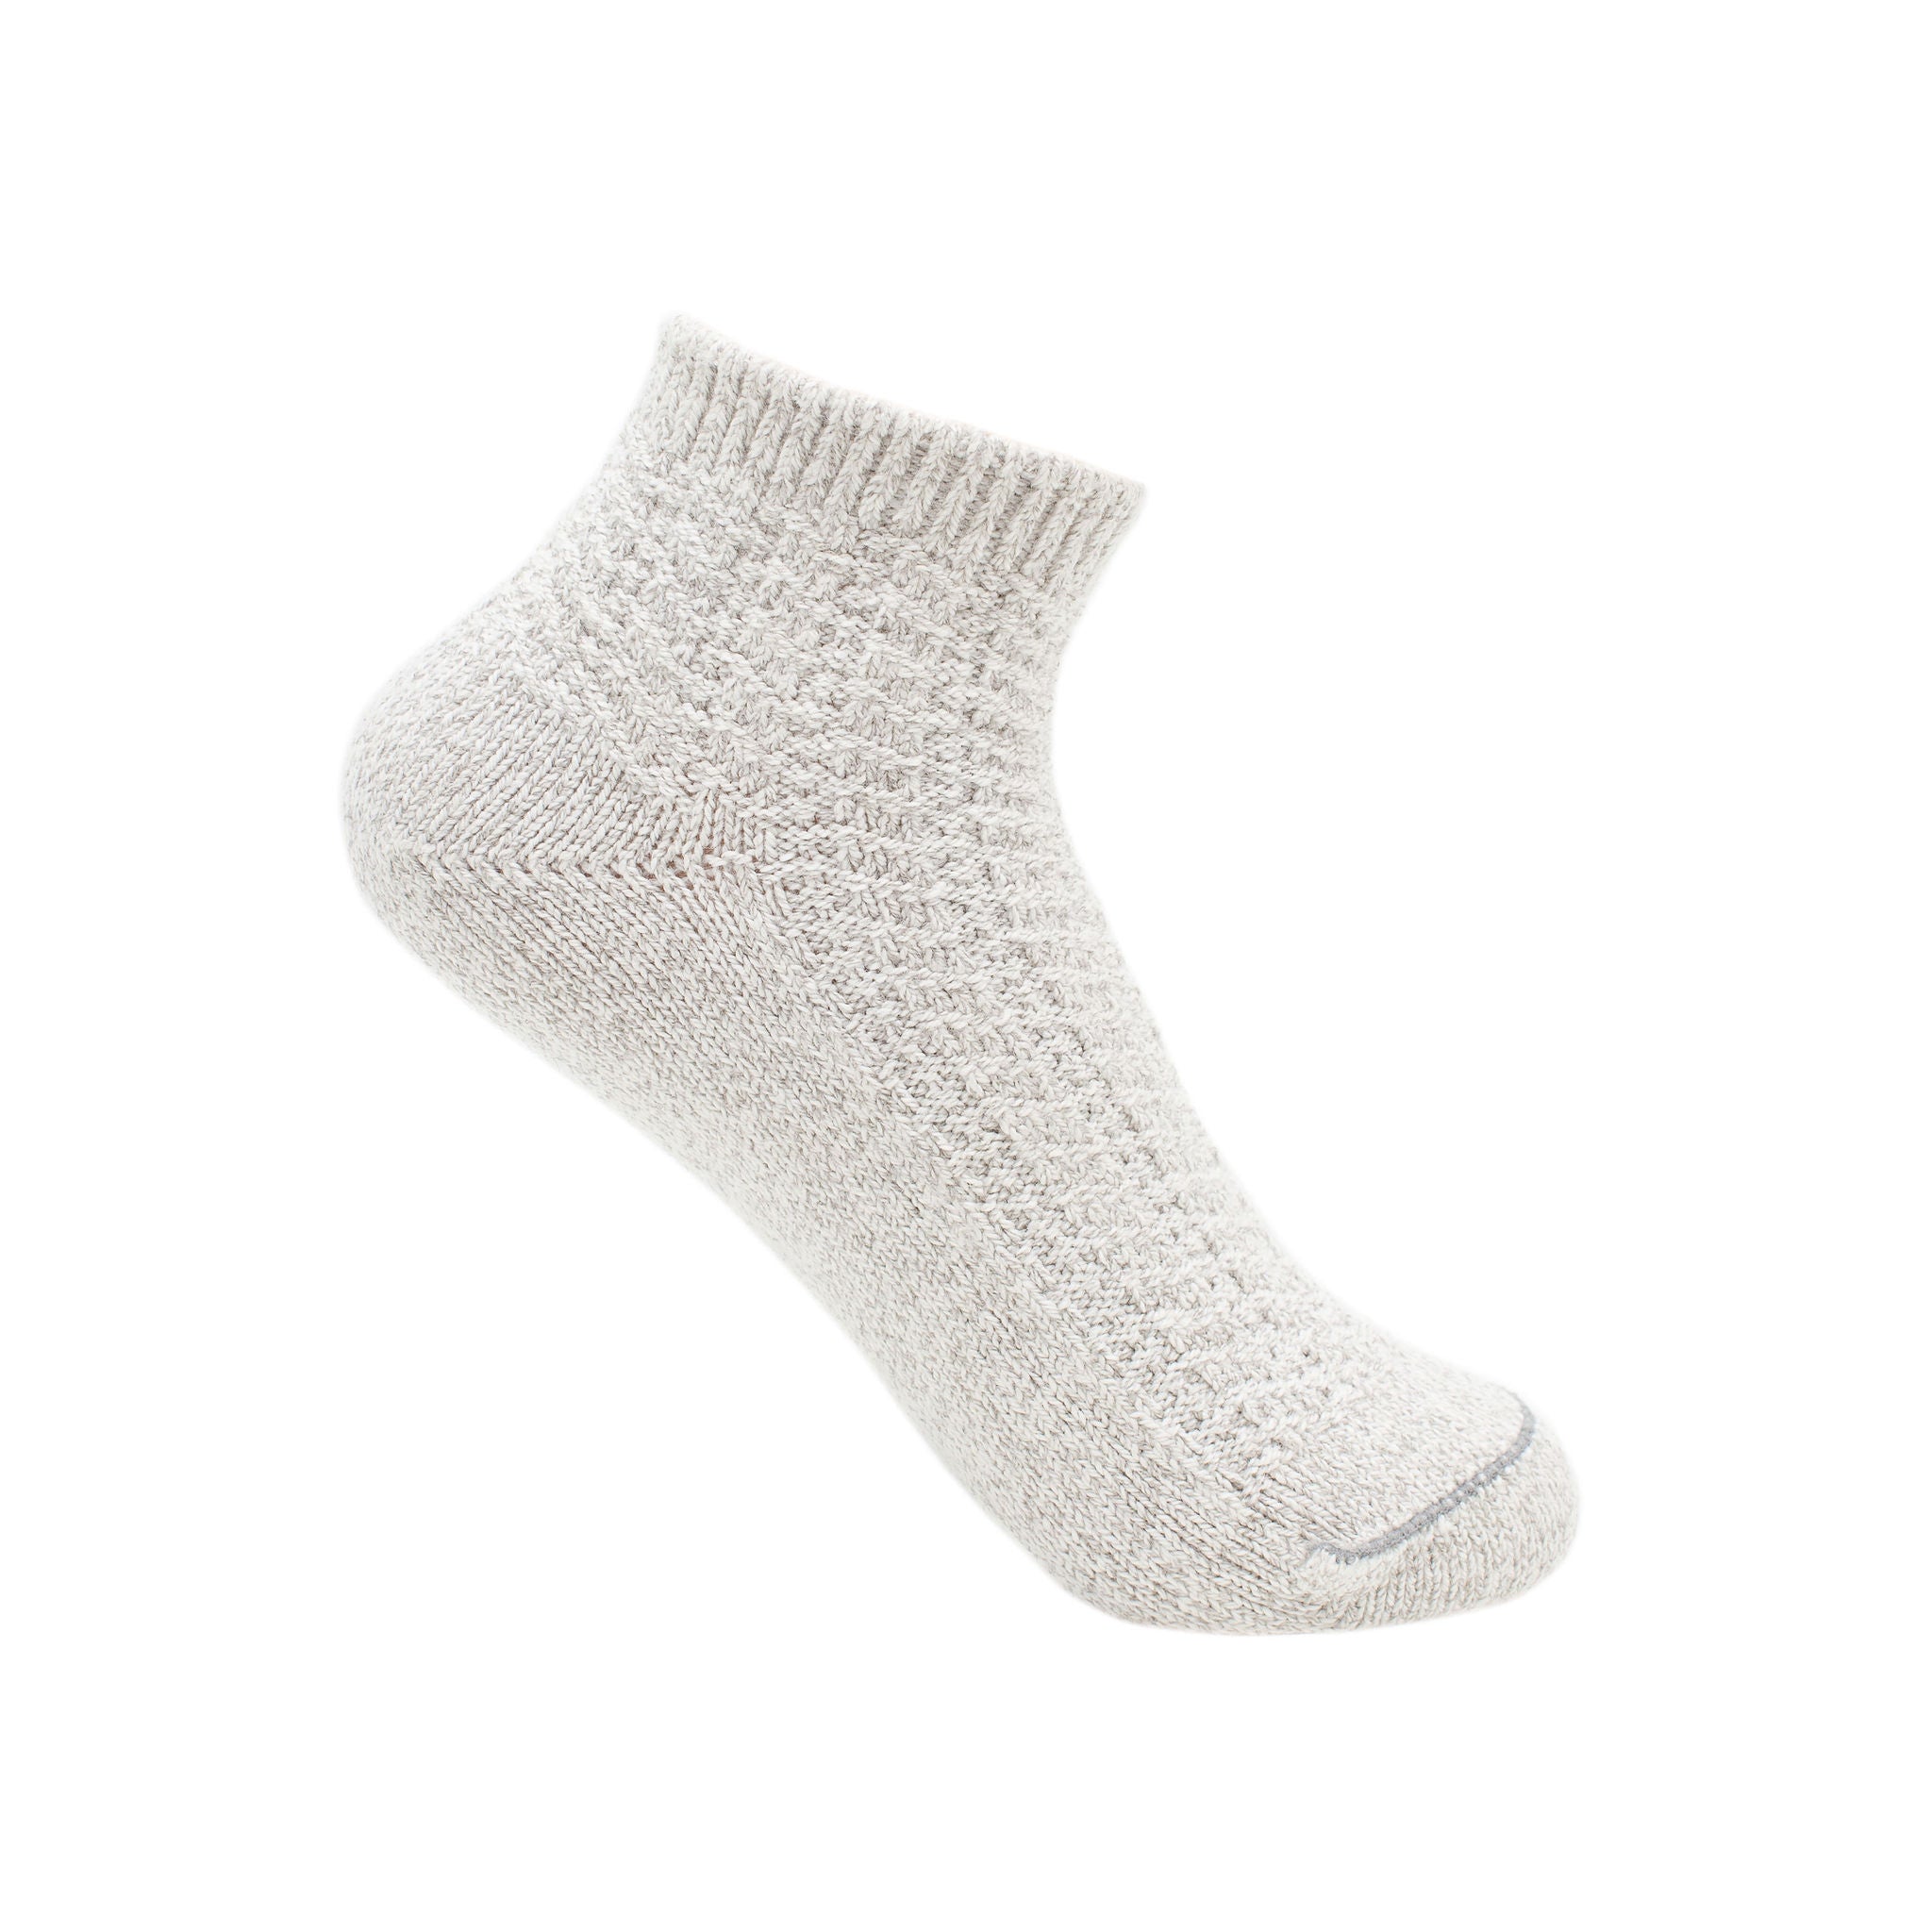 Best Antimicrobial Socks - Buy and Slay